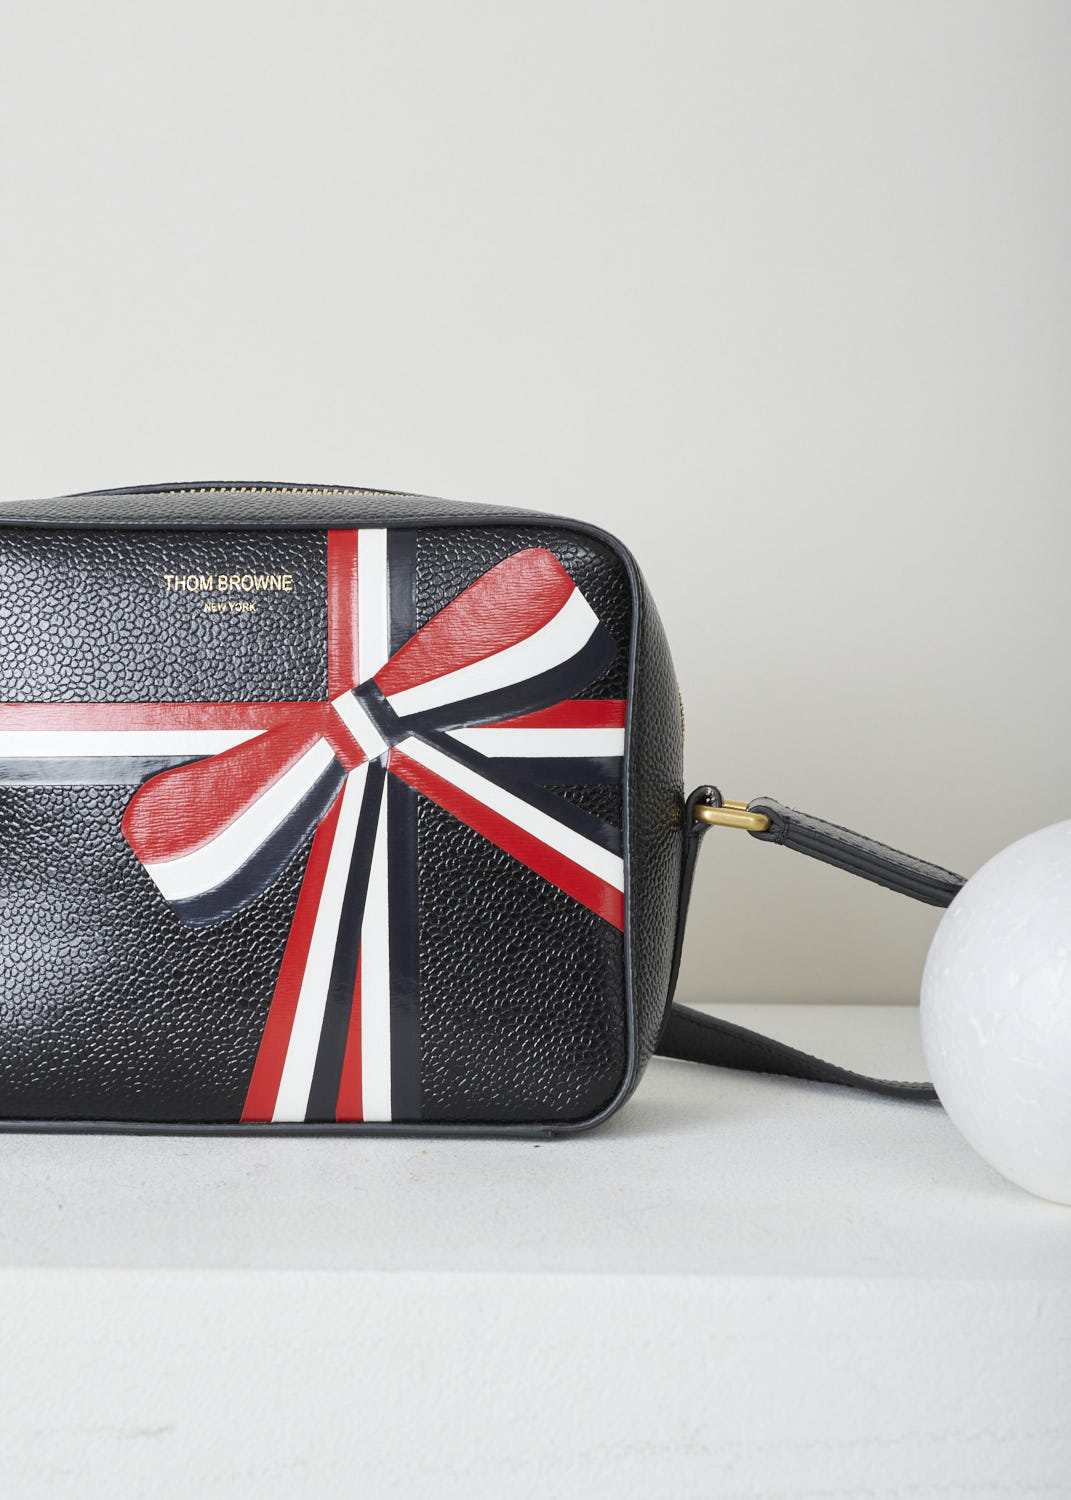 THOM BROWNE, CROSS BODY BAG WITH BOW DETAIL IN THE SIGNATURE TRI-COLOR STRIPE, FAP116A_03542_001, Black, Print, Detail, Leather cross body bag with a bow detail in the signature tri-color grosgrain stripe in the front and a single tri-colored tab on the back. This model is made with pebble grain leather. Up top, a gold-toned zipper gives access to the interior of the bag. The bag opens up to a single spacious compartment with on one side, a single patch pocket against the back wall. 


Size: 17 cm x 13 cm x 7 cm / 6.6 inch x 5.1 inch x 2.7 inch 
